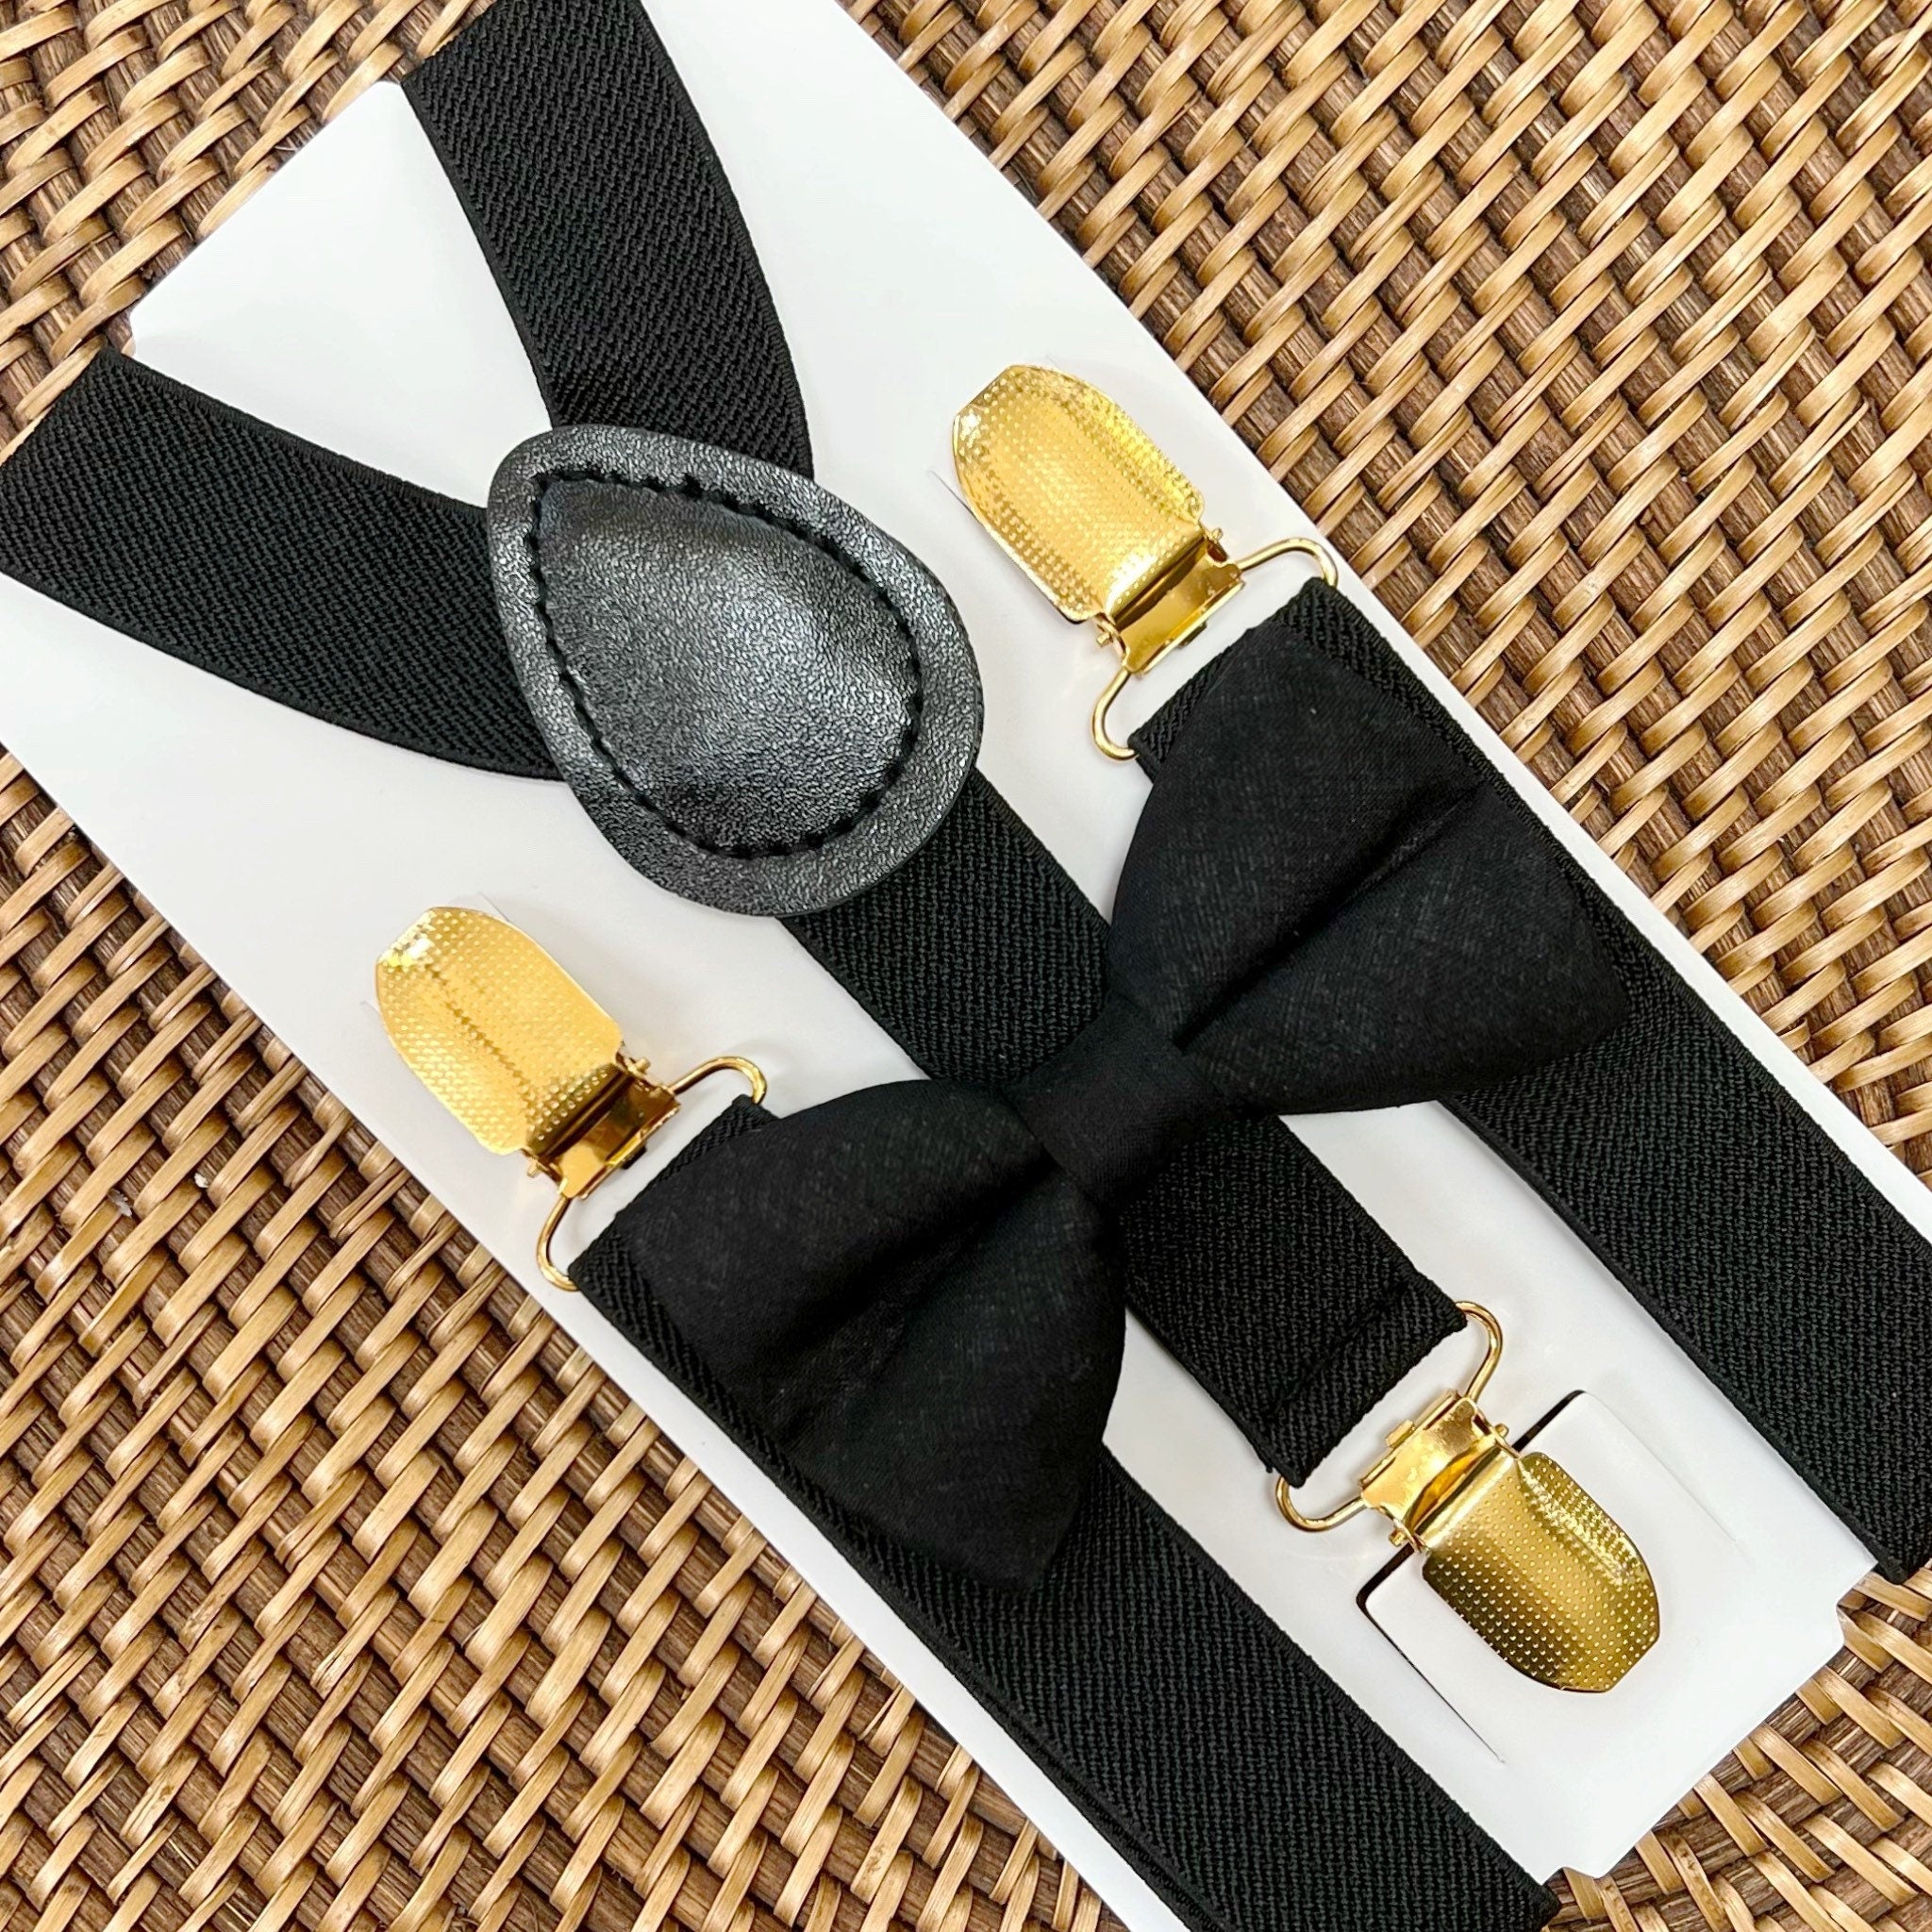 Black Bow Tie and Black & Gold Suspenders Set – The Bold Bow Tie